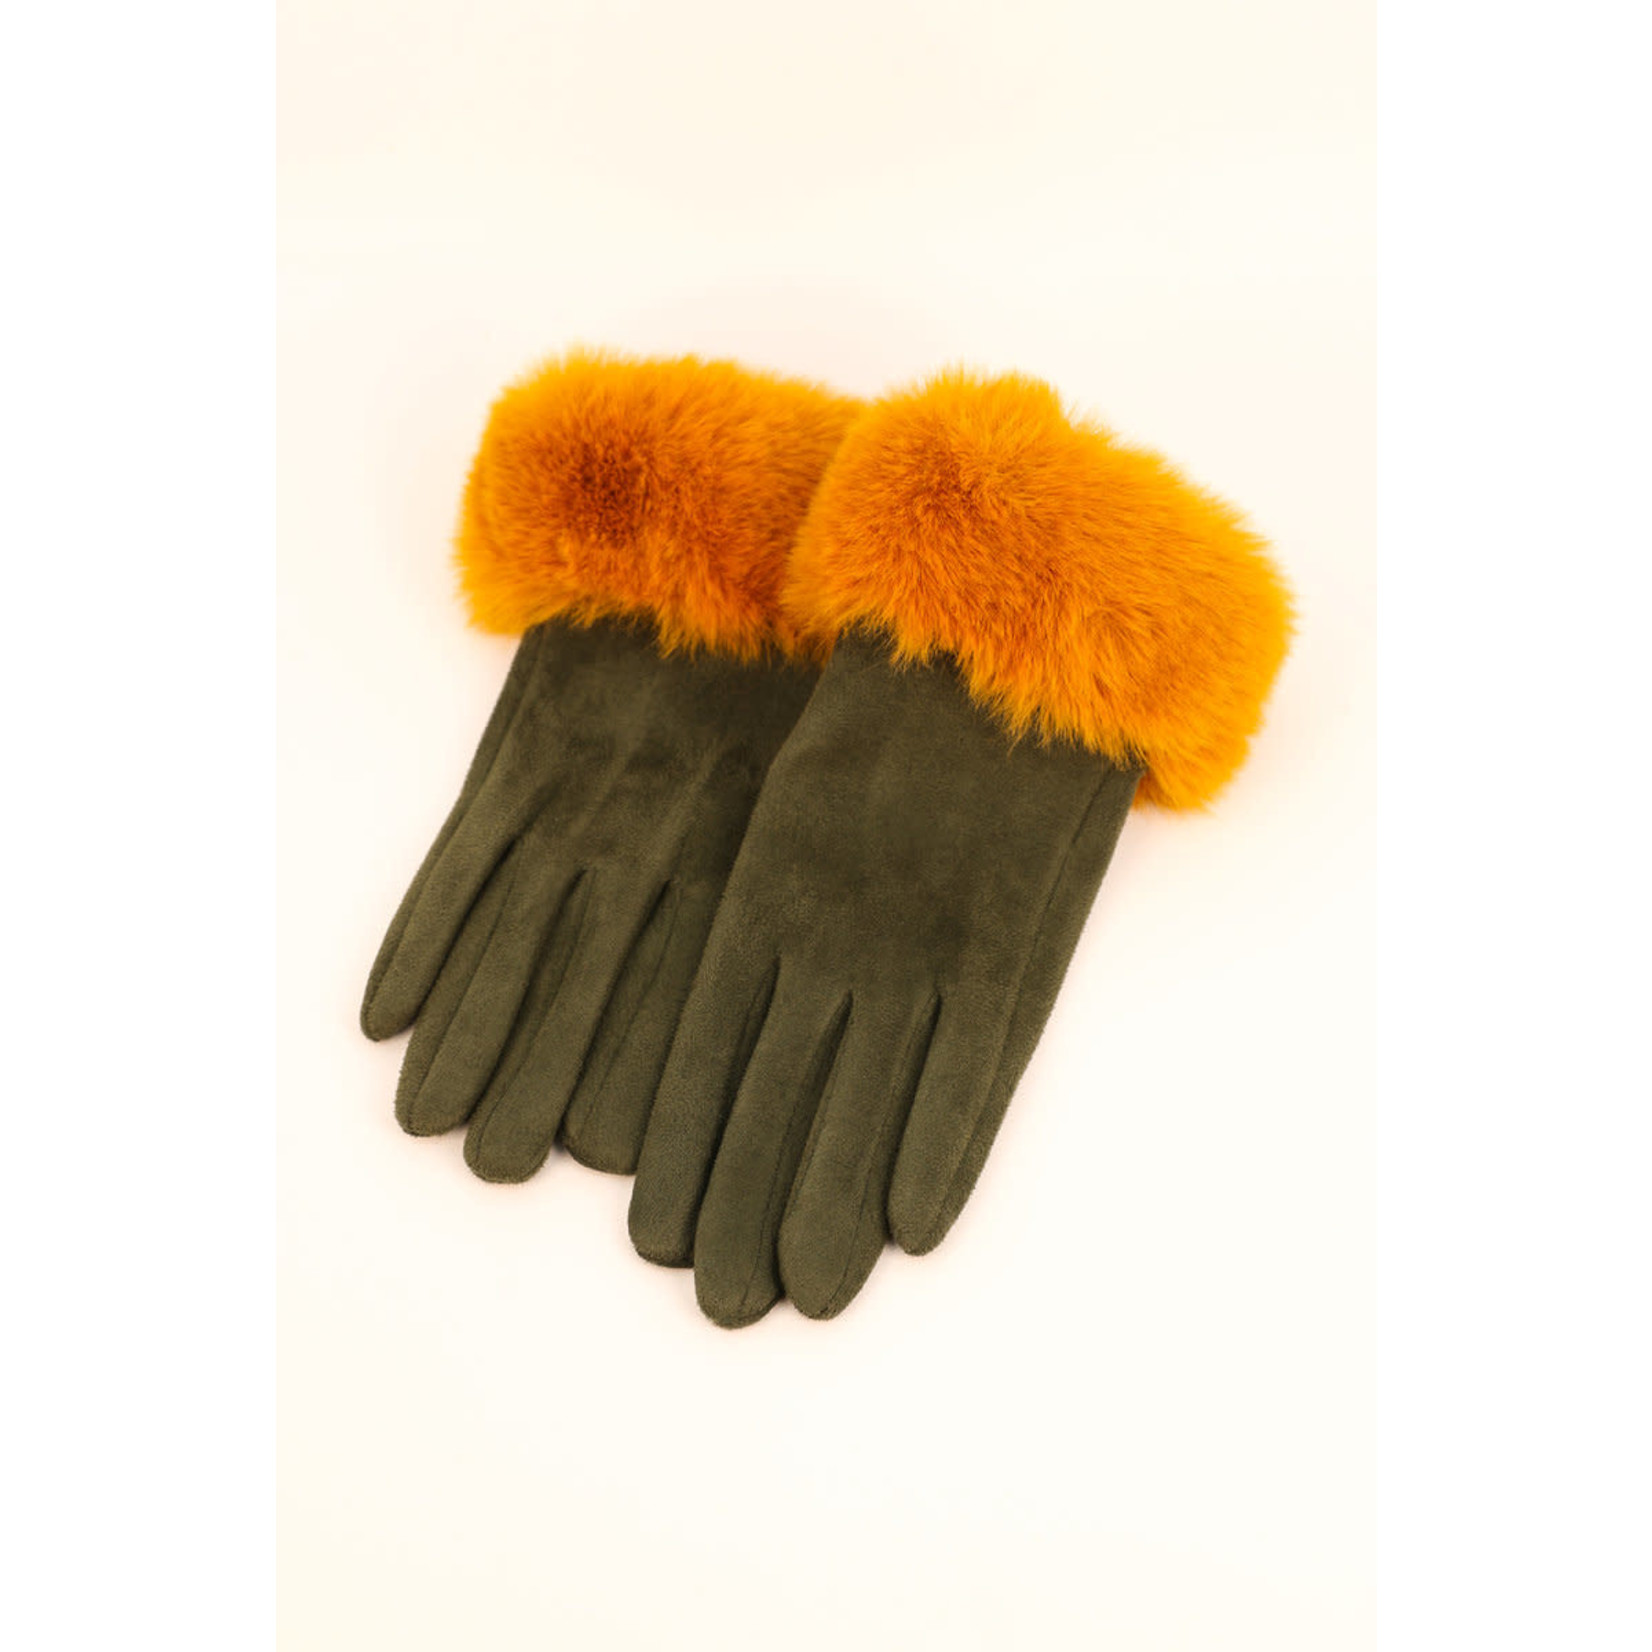 Powder Bettina Mix Faux Suede Gloves in Olive/Mustard